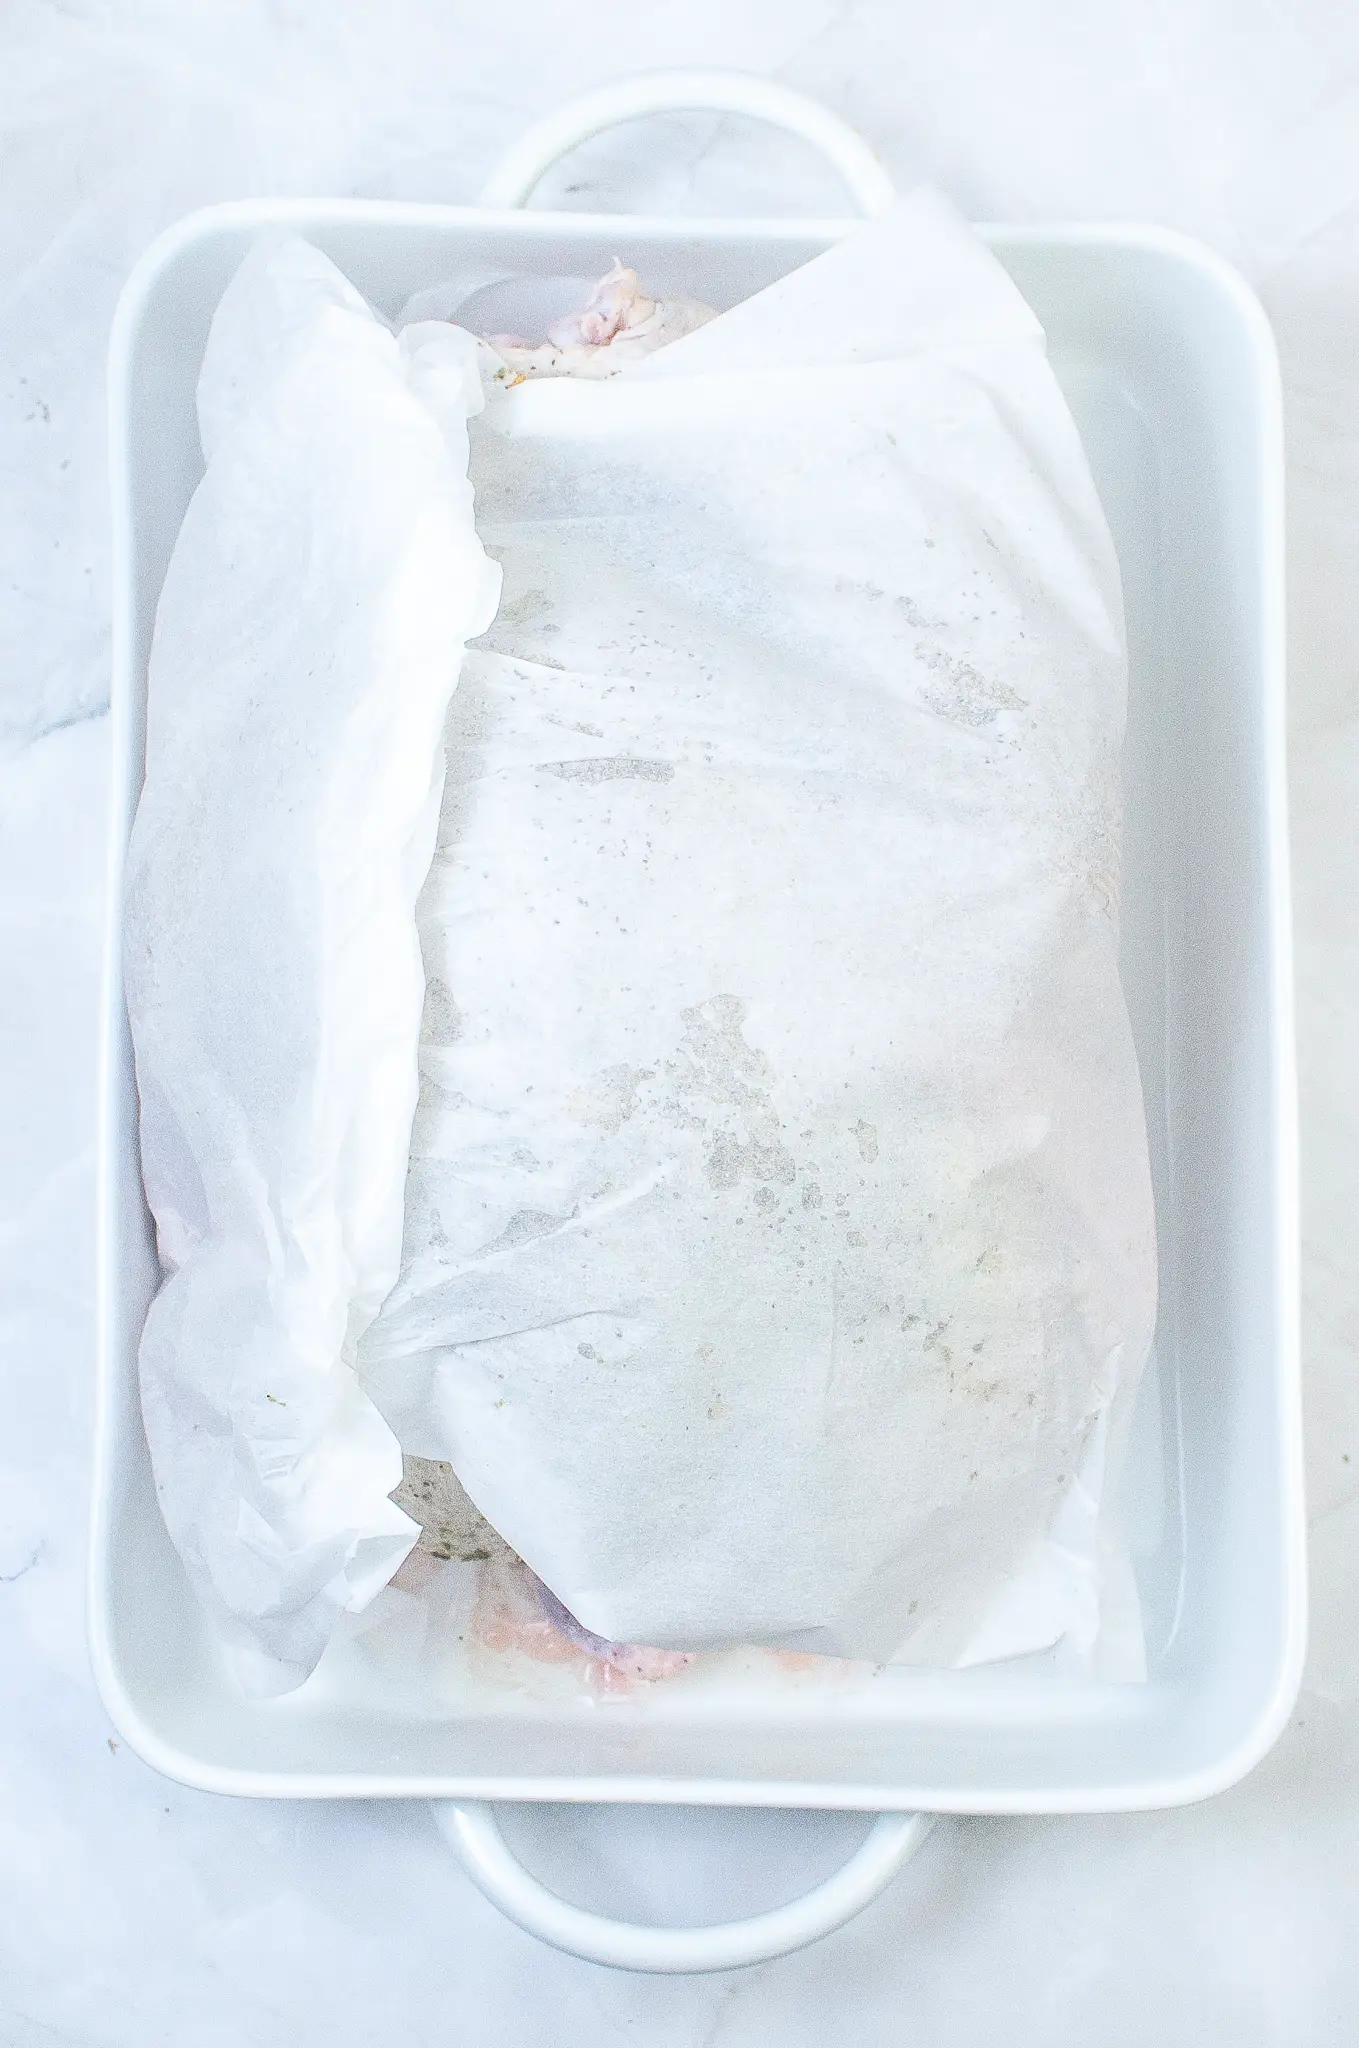 Parchment paper covering the raw turkey.